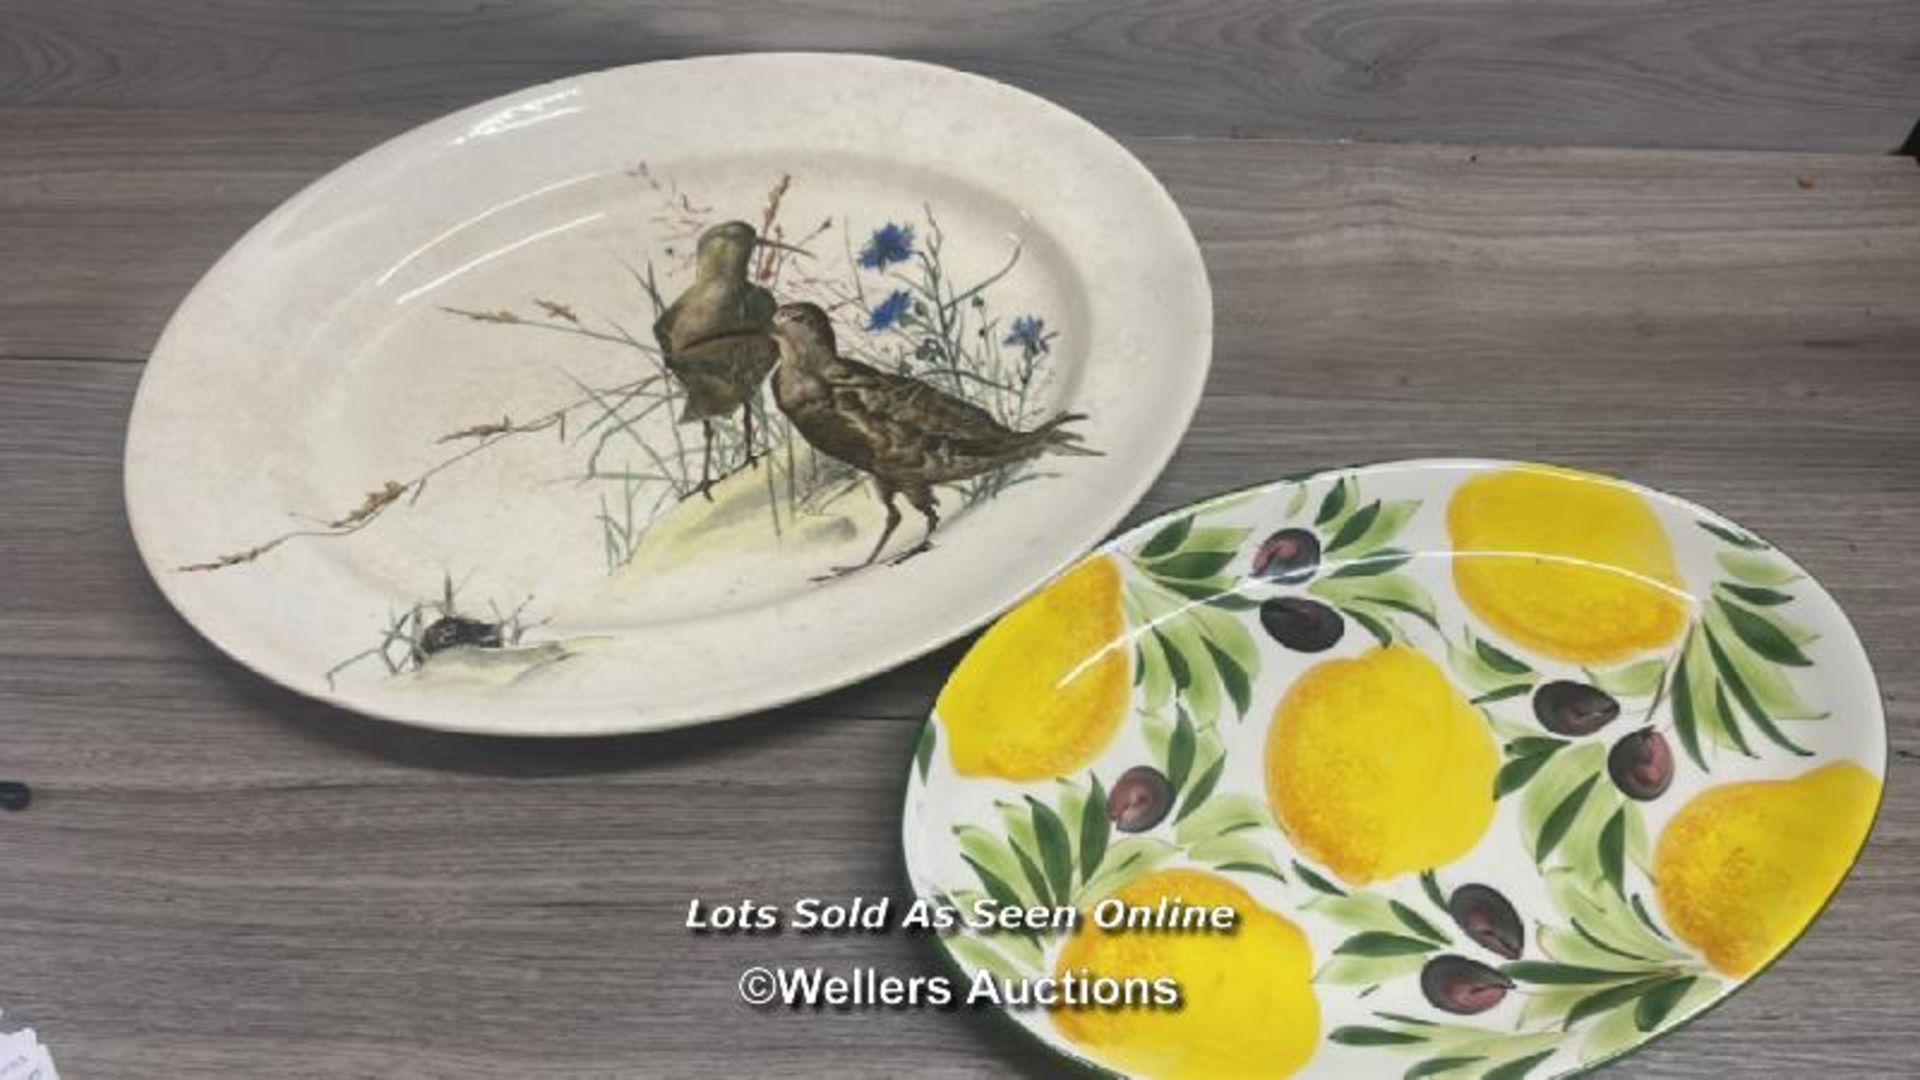 LARGE DEPOSE OVAL PLATTER DECORATED WITH BIRDS AND A SMALLER PLATTER DECORATED WITH LEMONS,